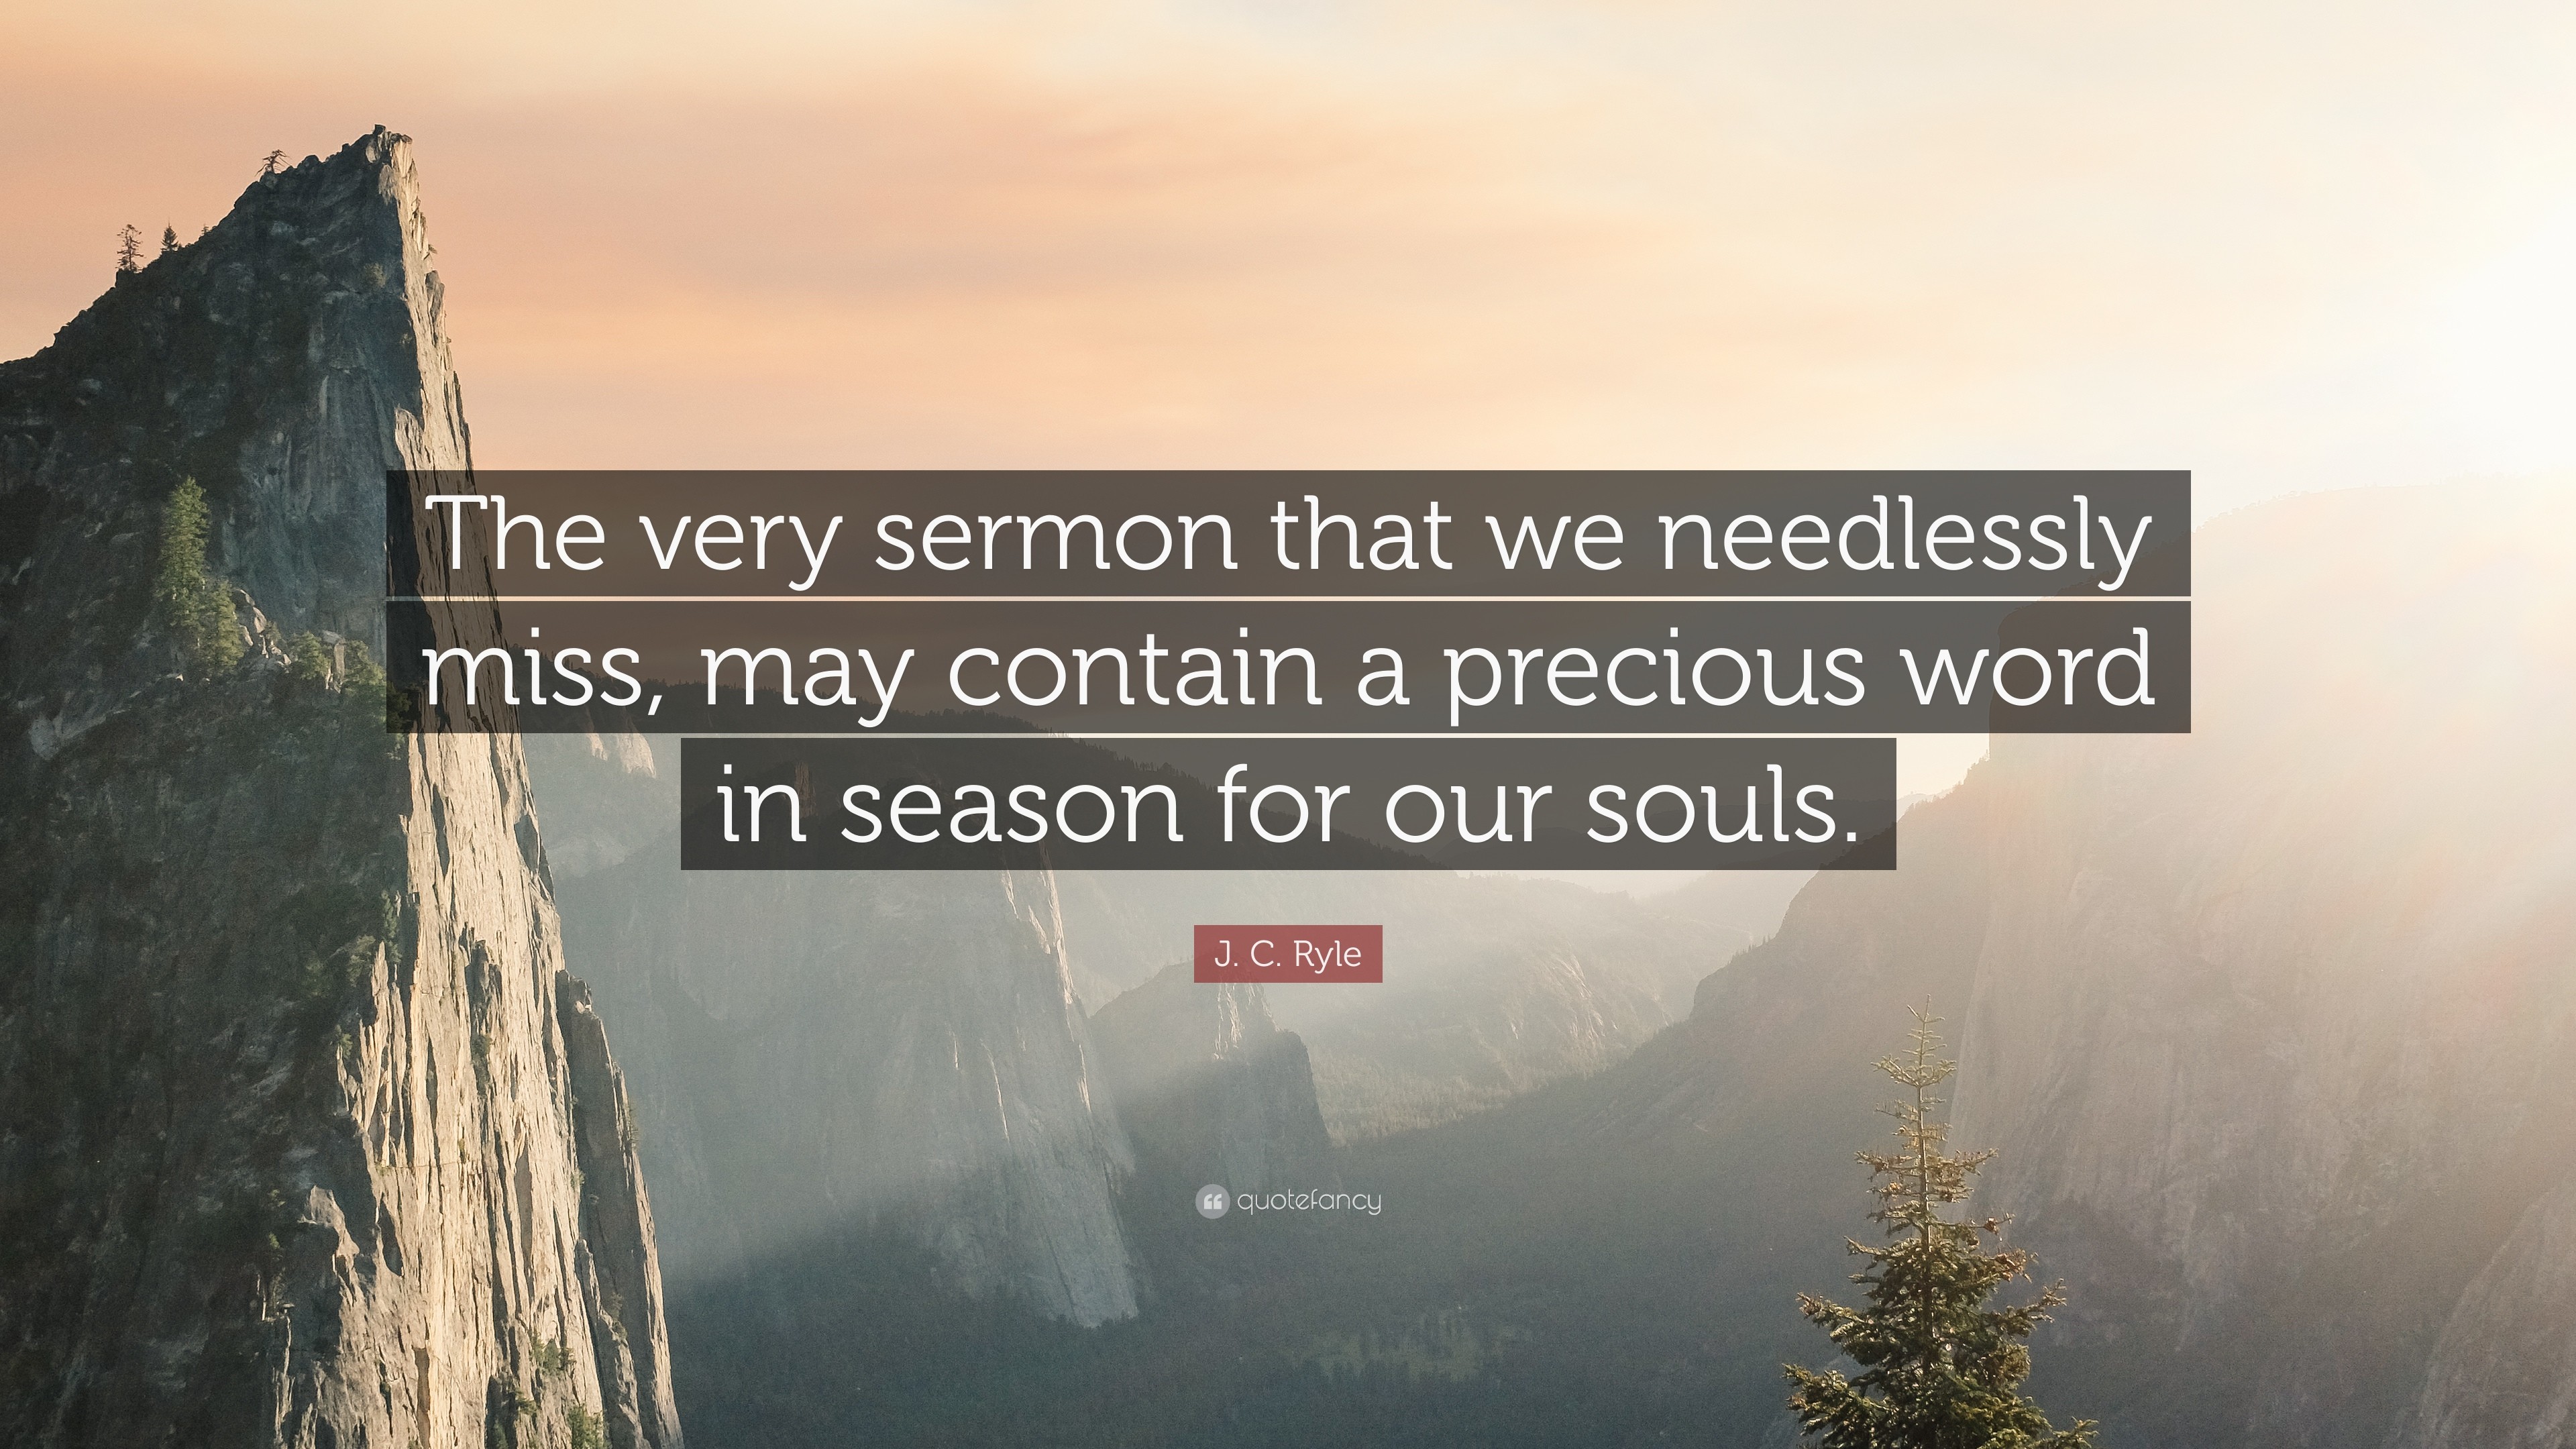 3840x2160 J. C. Ryle Quote: “The very sermon that we needlessly miss, may contain a